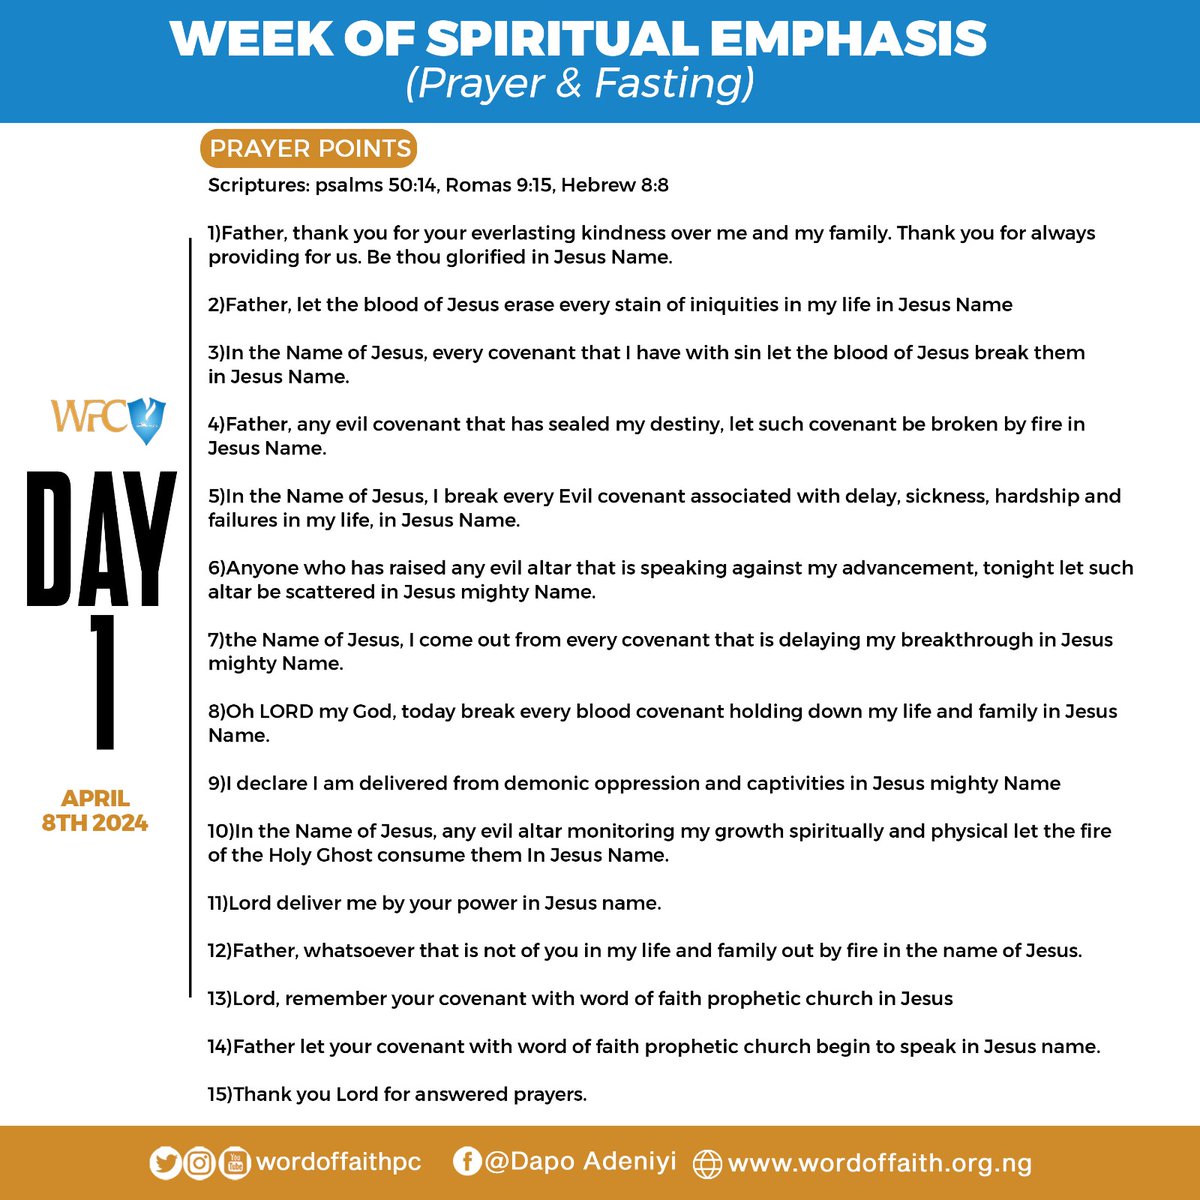 Week of spiritual emphasis

DAY 1

It's our month to WALK IN DIVINE COVENANT 
.
.
#wordoffaithpc #faithcity #wfc #wordoffaith #propheticimpactconference #helpisontheway #unusualtestimoies #propheticimpact #april2024 #strengths #weekofspiritualemphasis